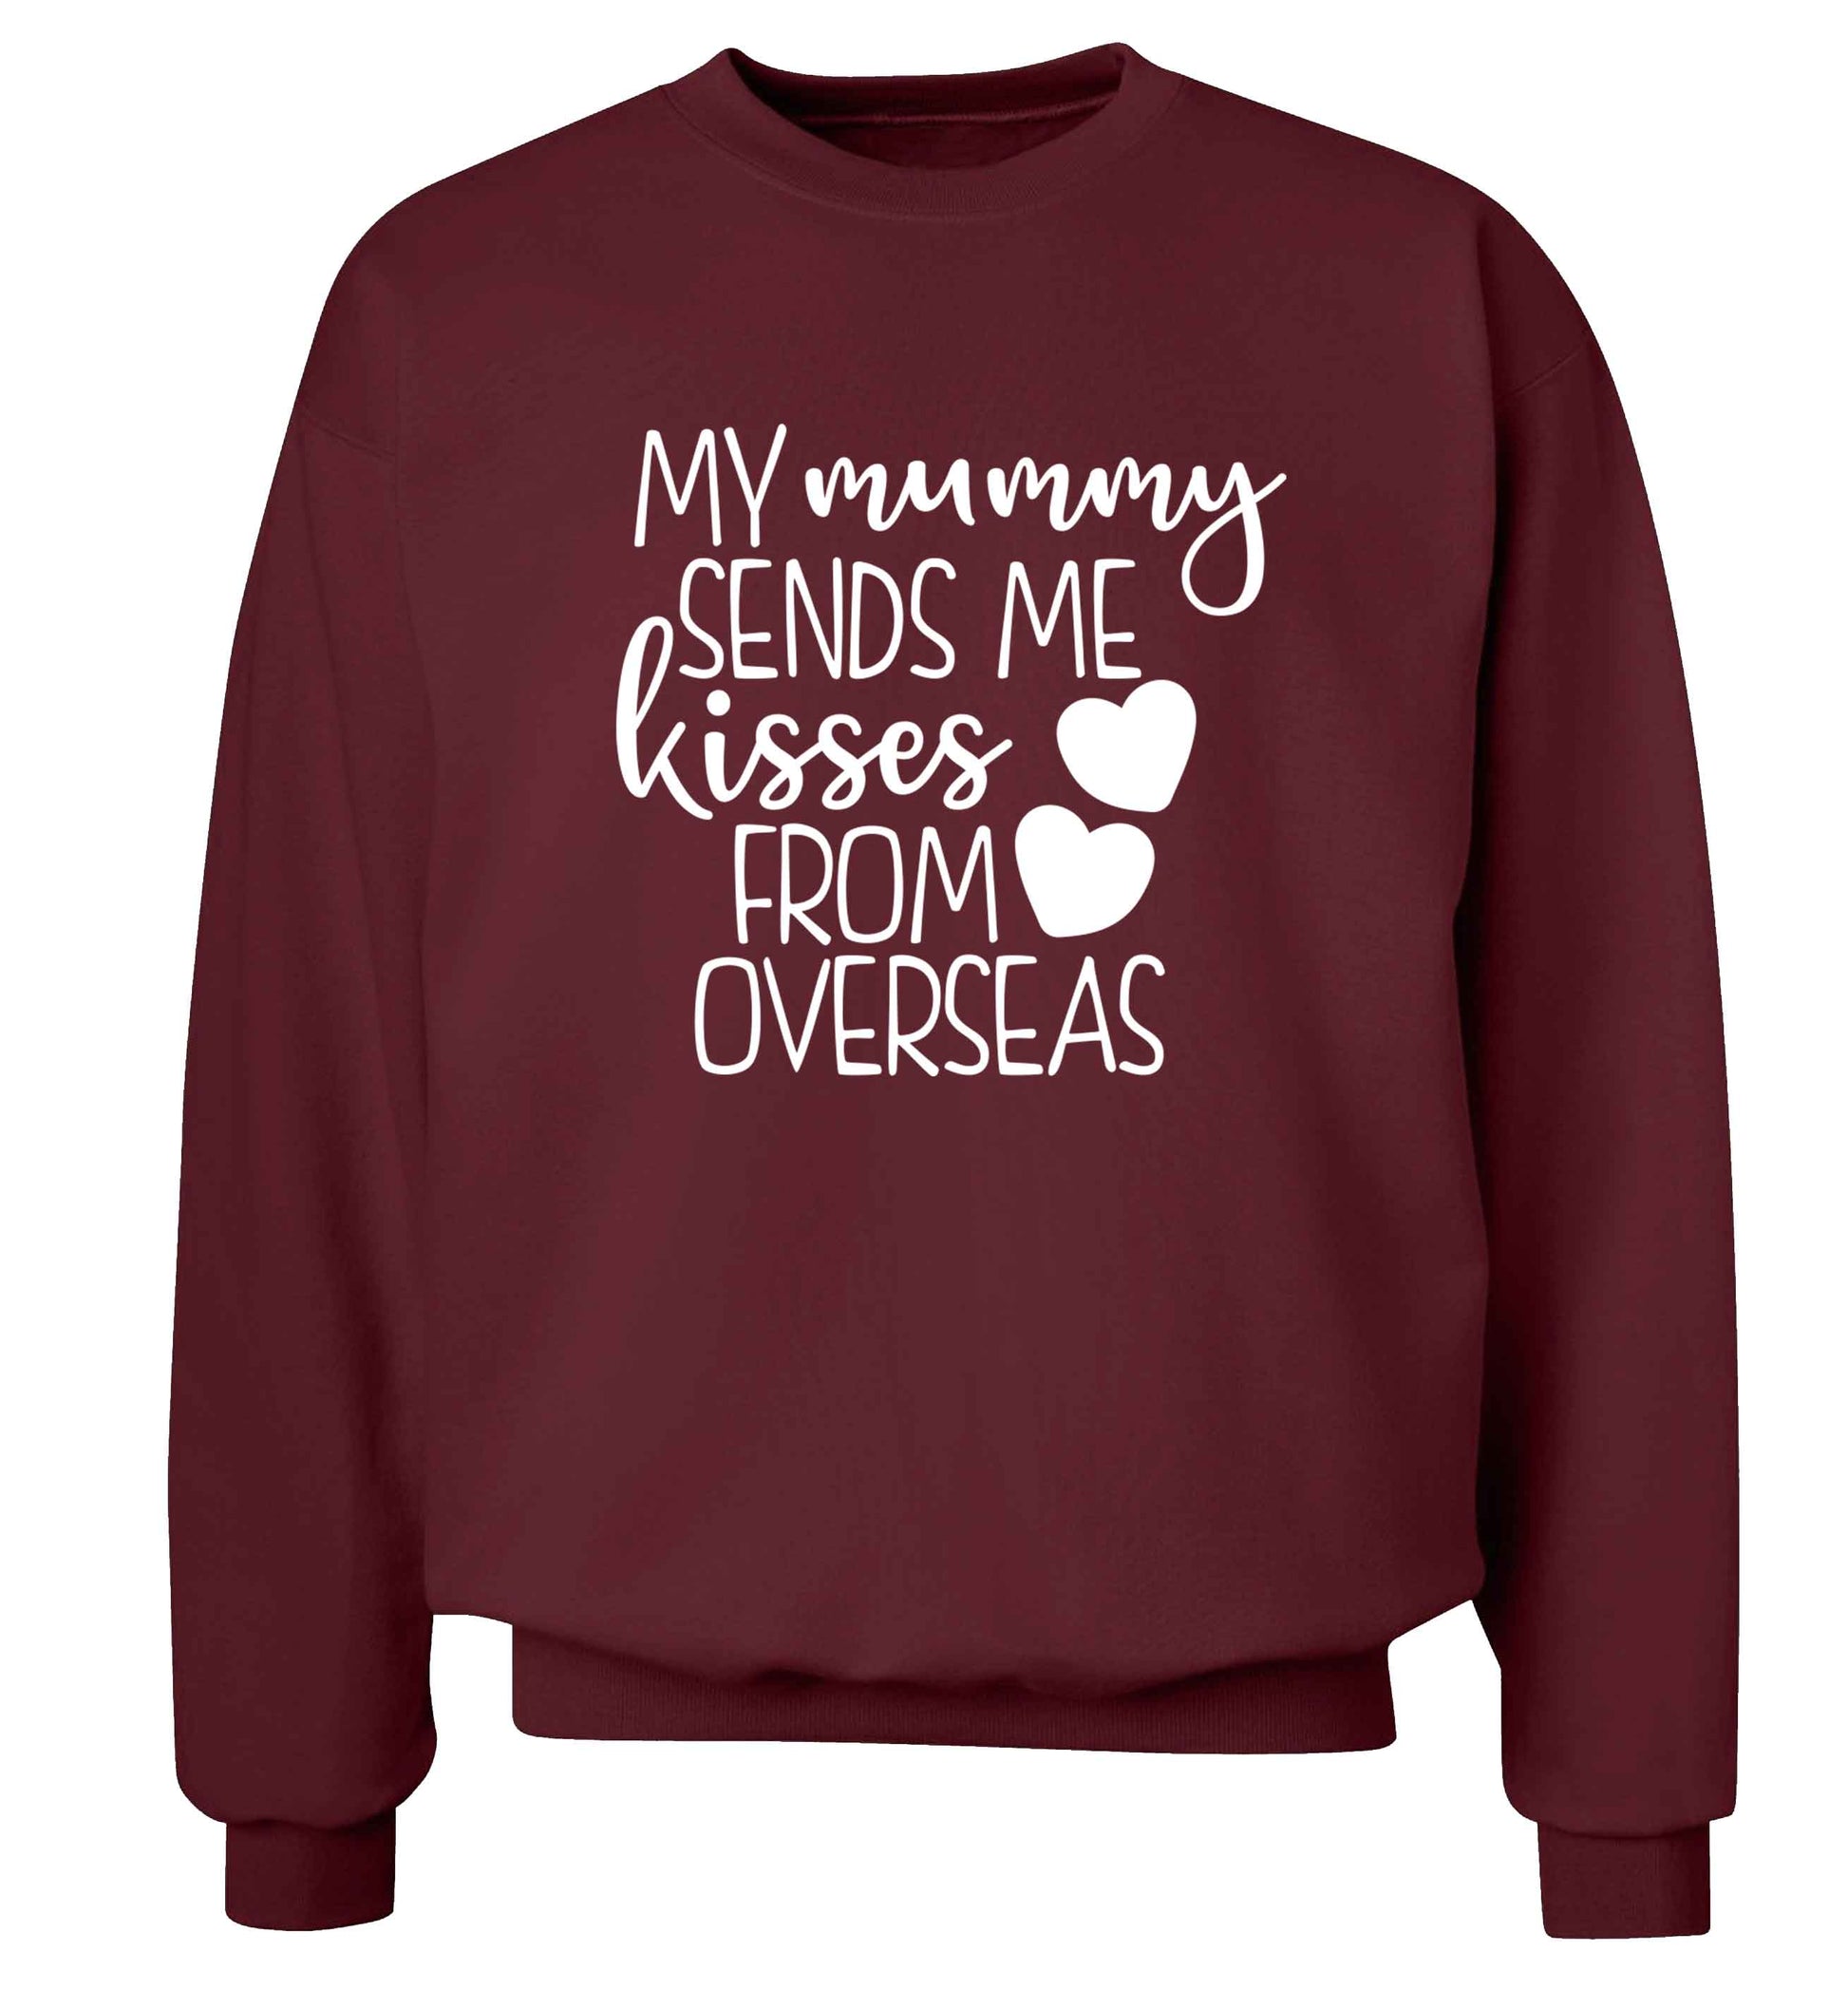 My mummy sends me kisses from overseas adult's unisex maroon sweater 2XL